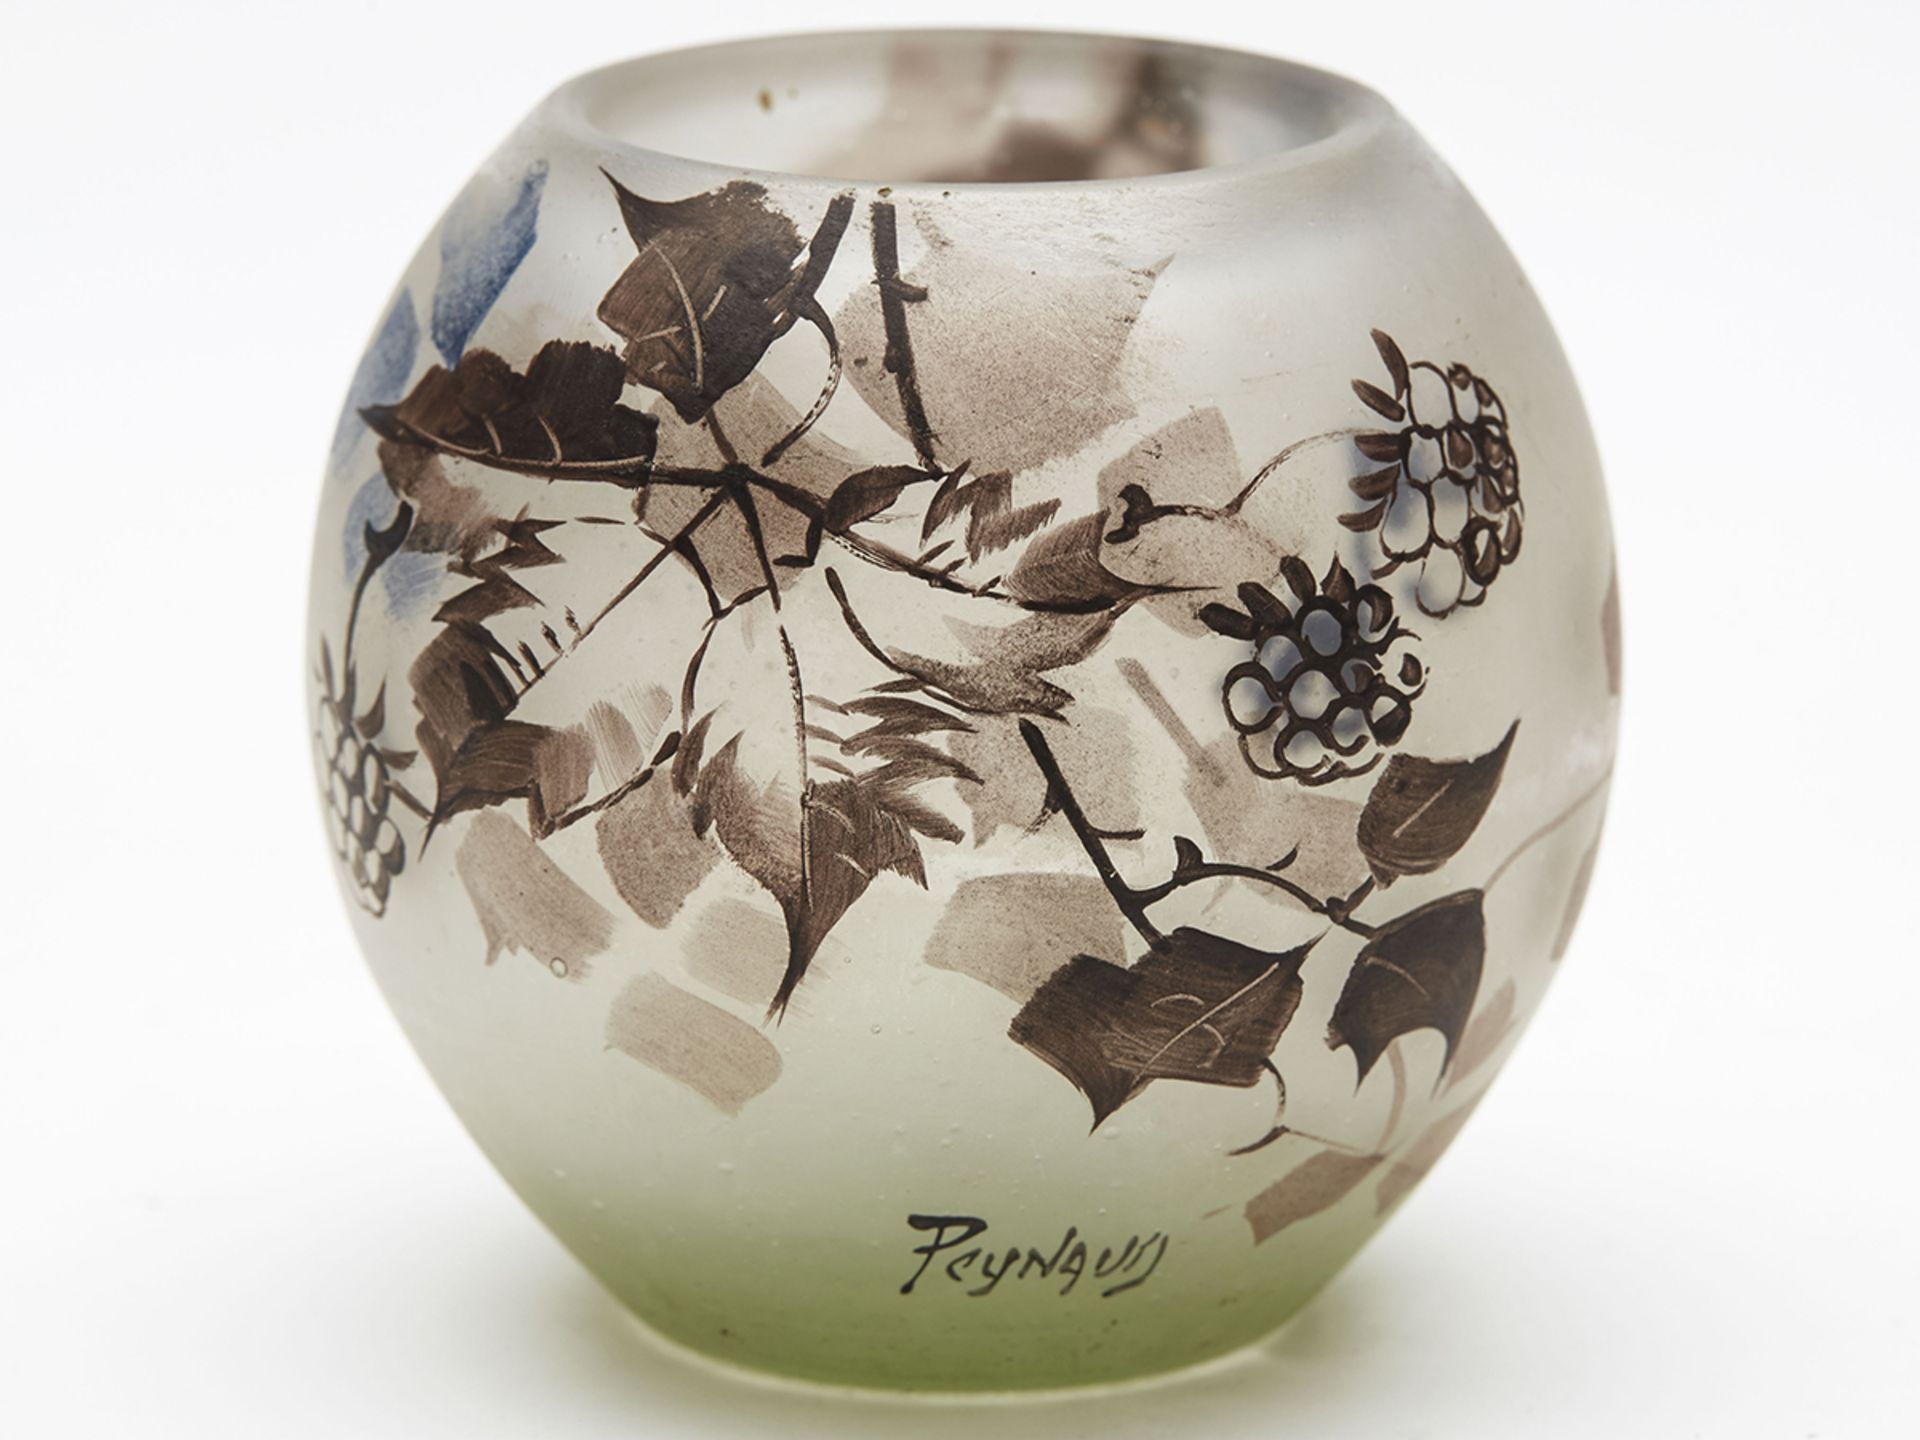 Jean-Simon Paynaud Fruiting Stem Etched Glass Vase C.1910 - Image 4 of 8